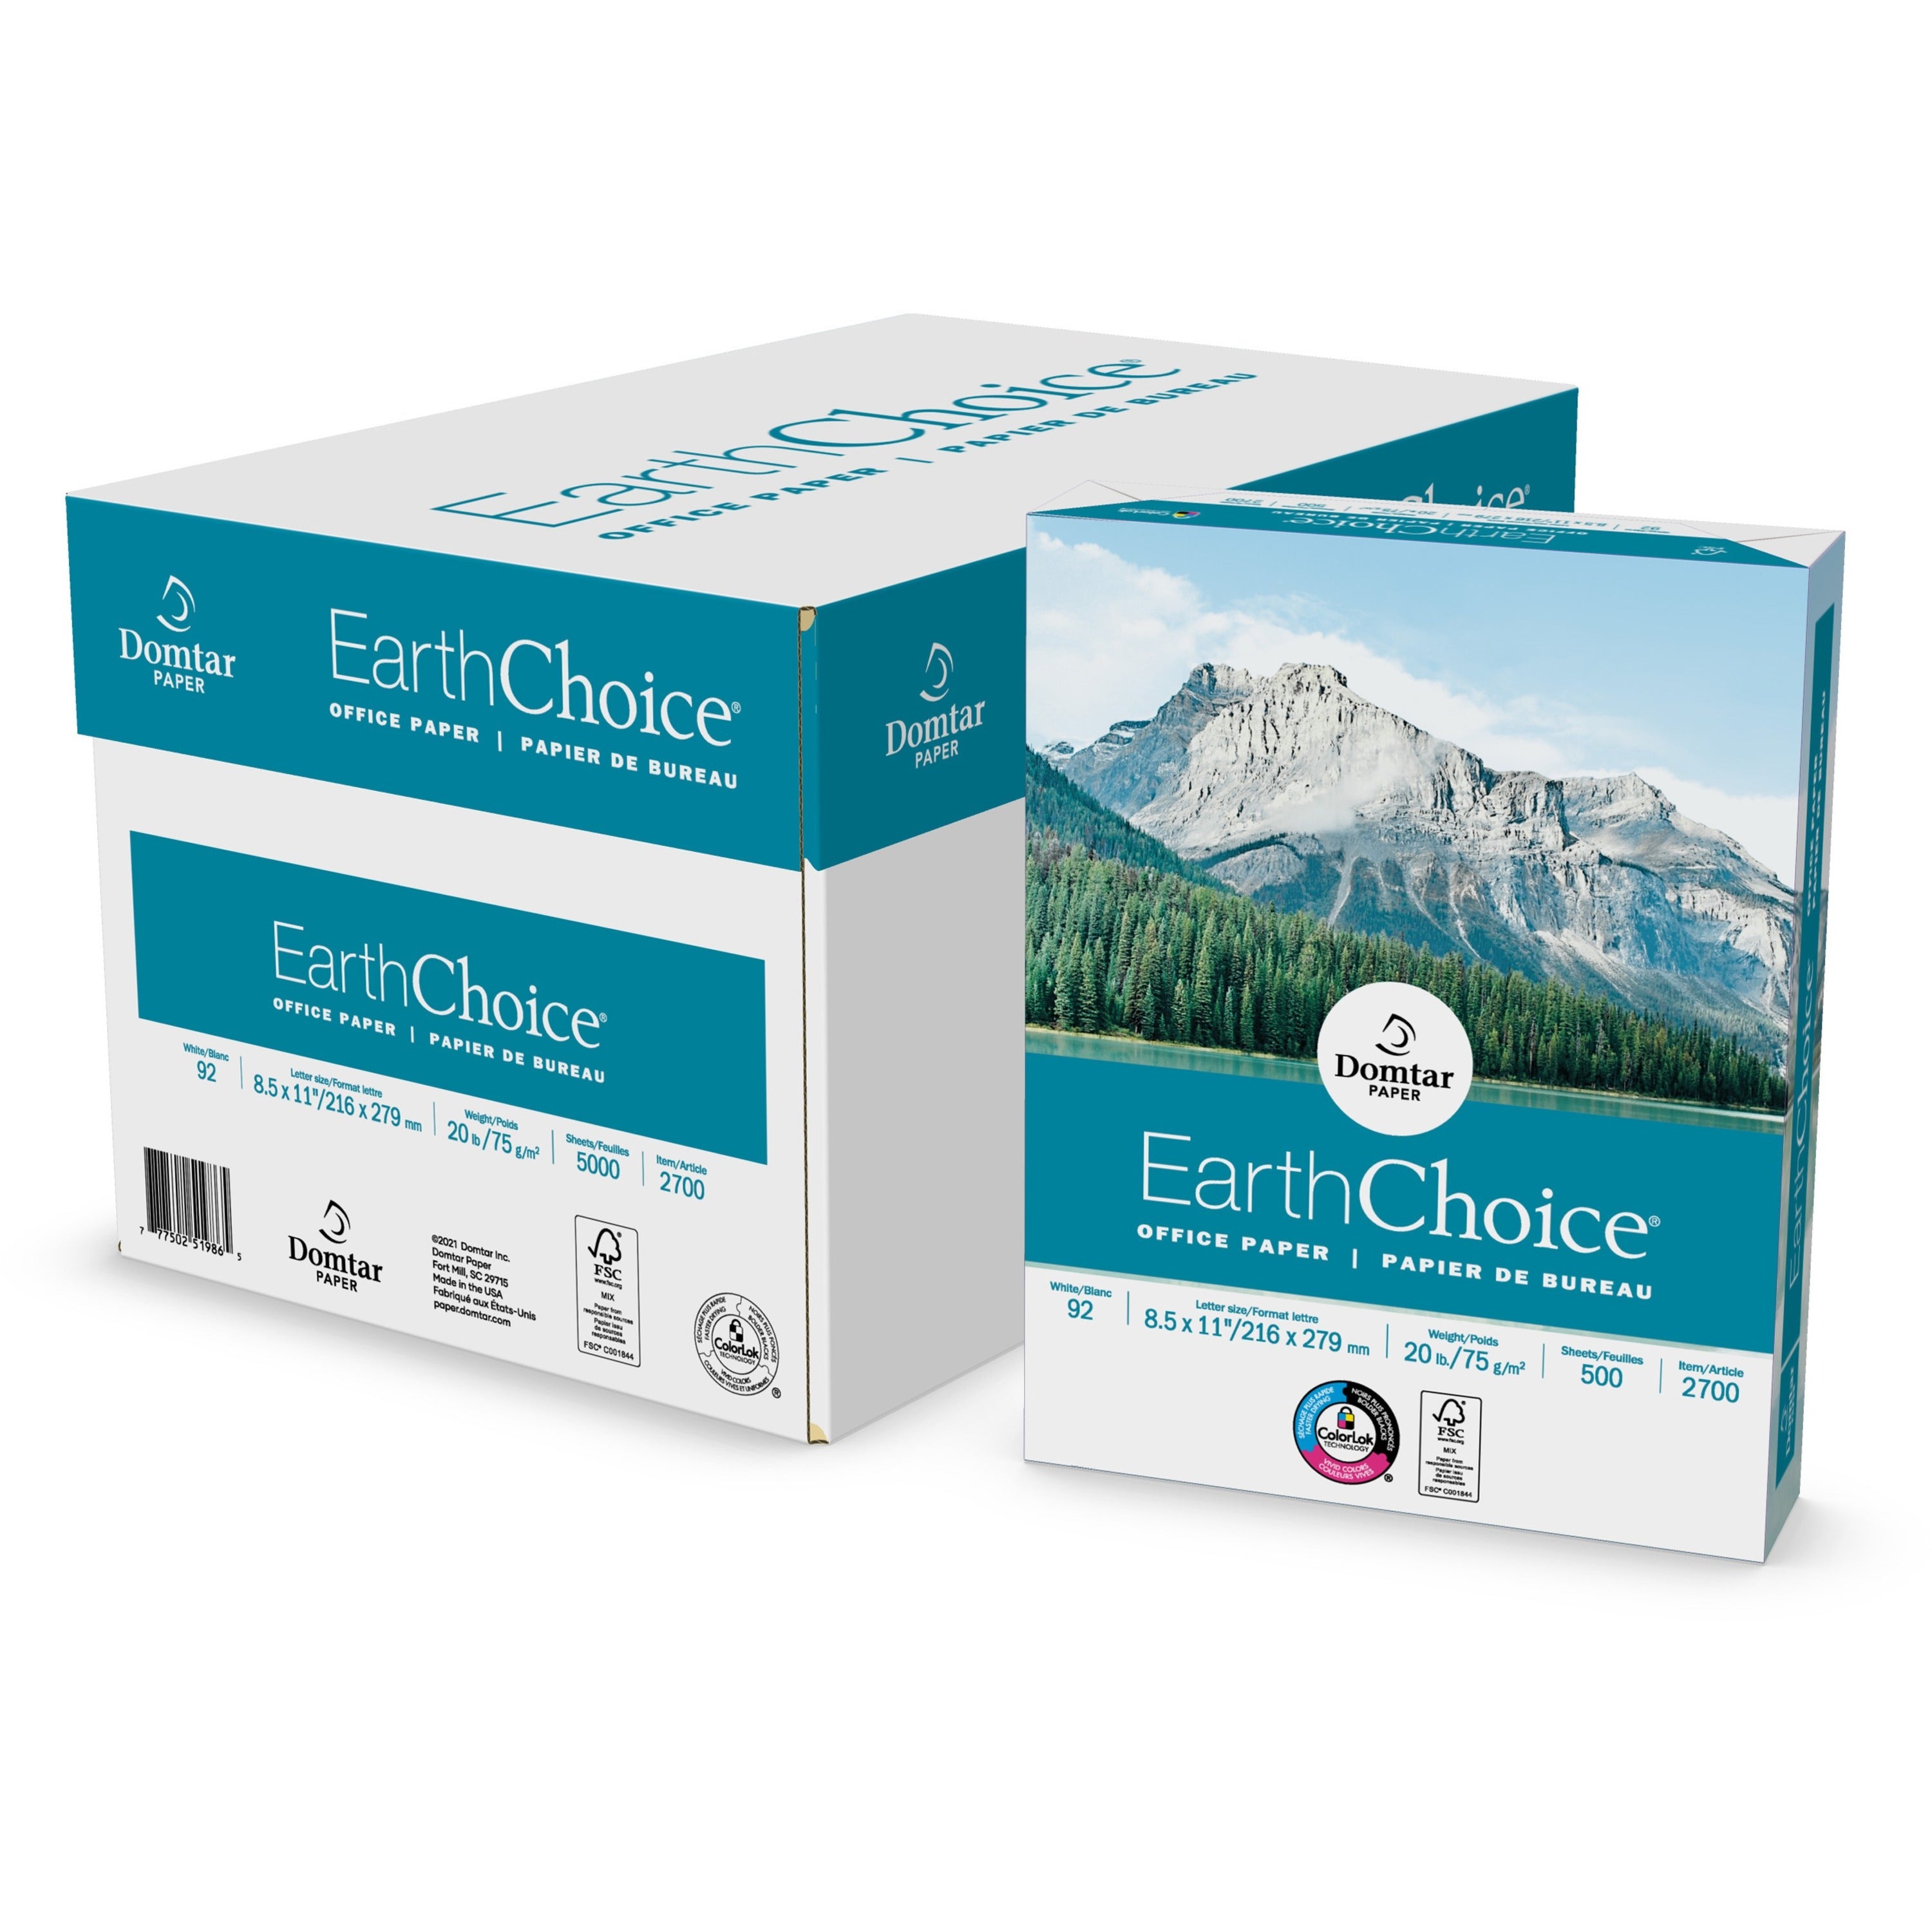 EarthChoice Office Paper - White - Letter - 8 1/2" x 11" - 20 lb Basis Weight - 5000 / Carton - White - 